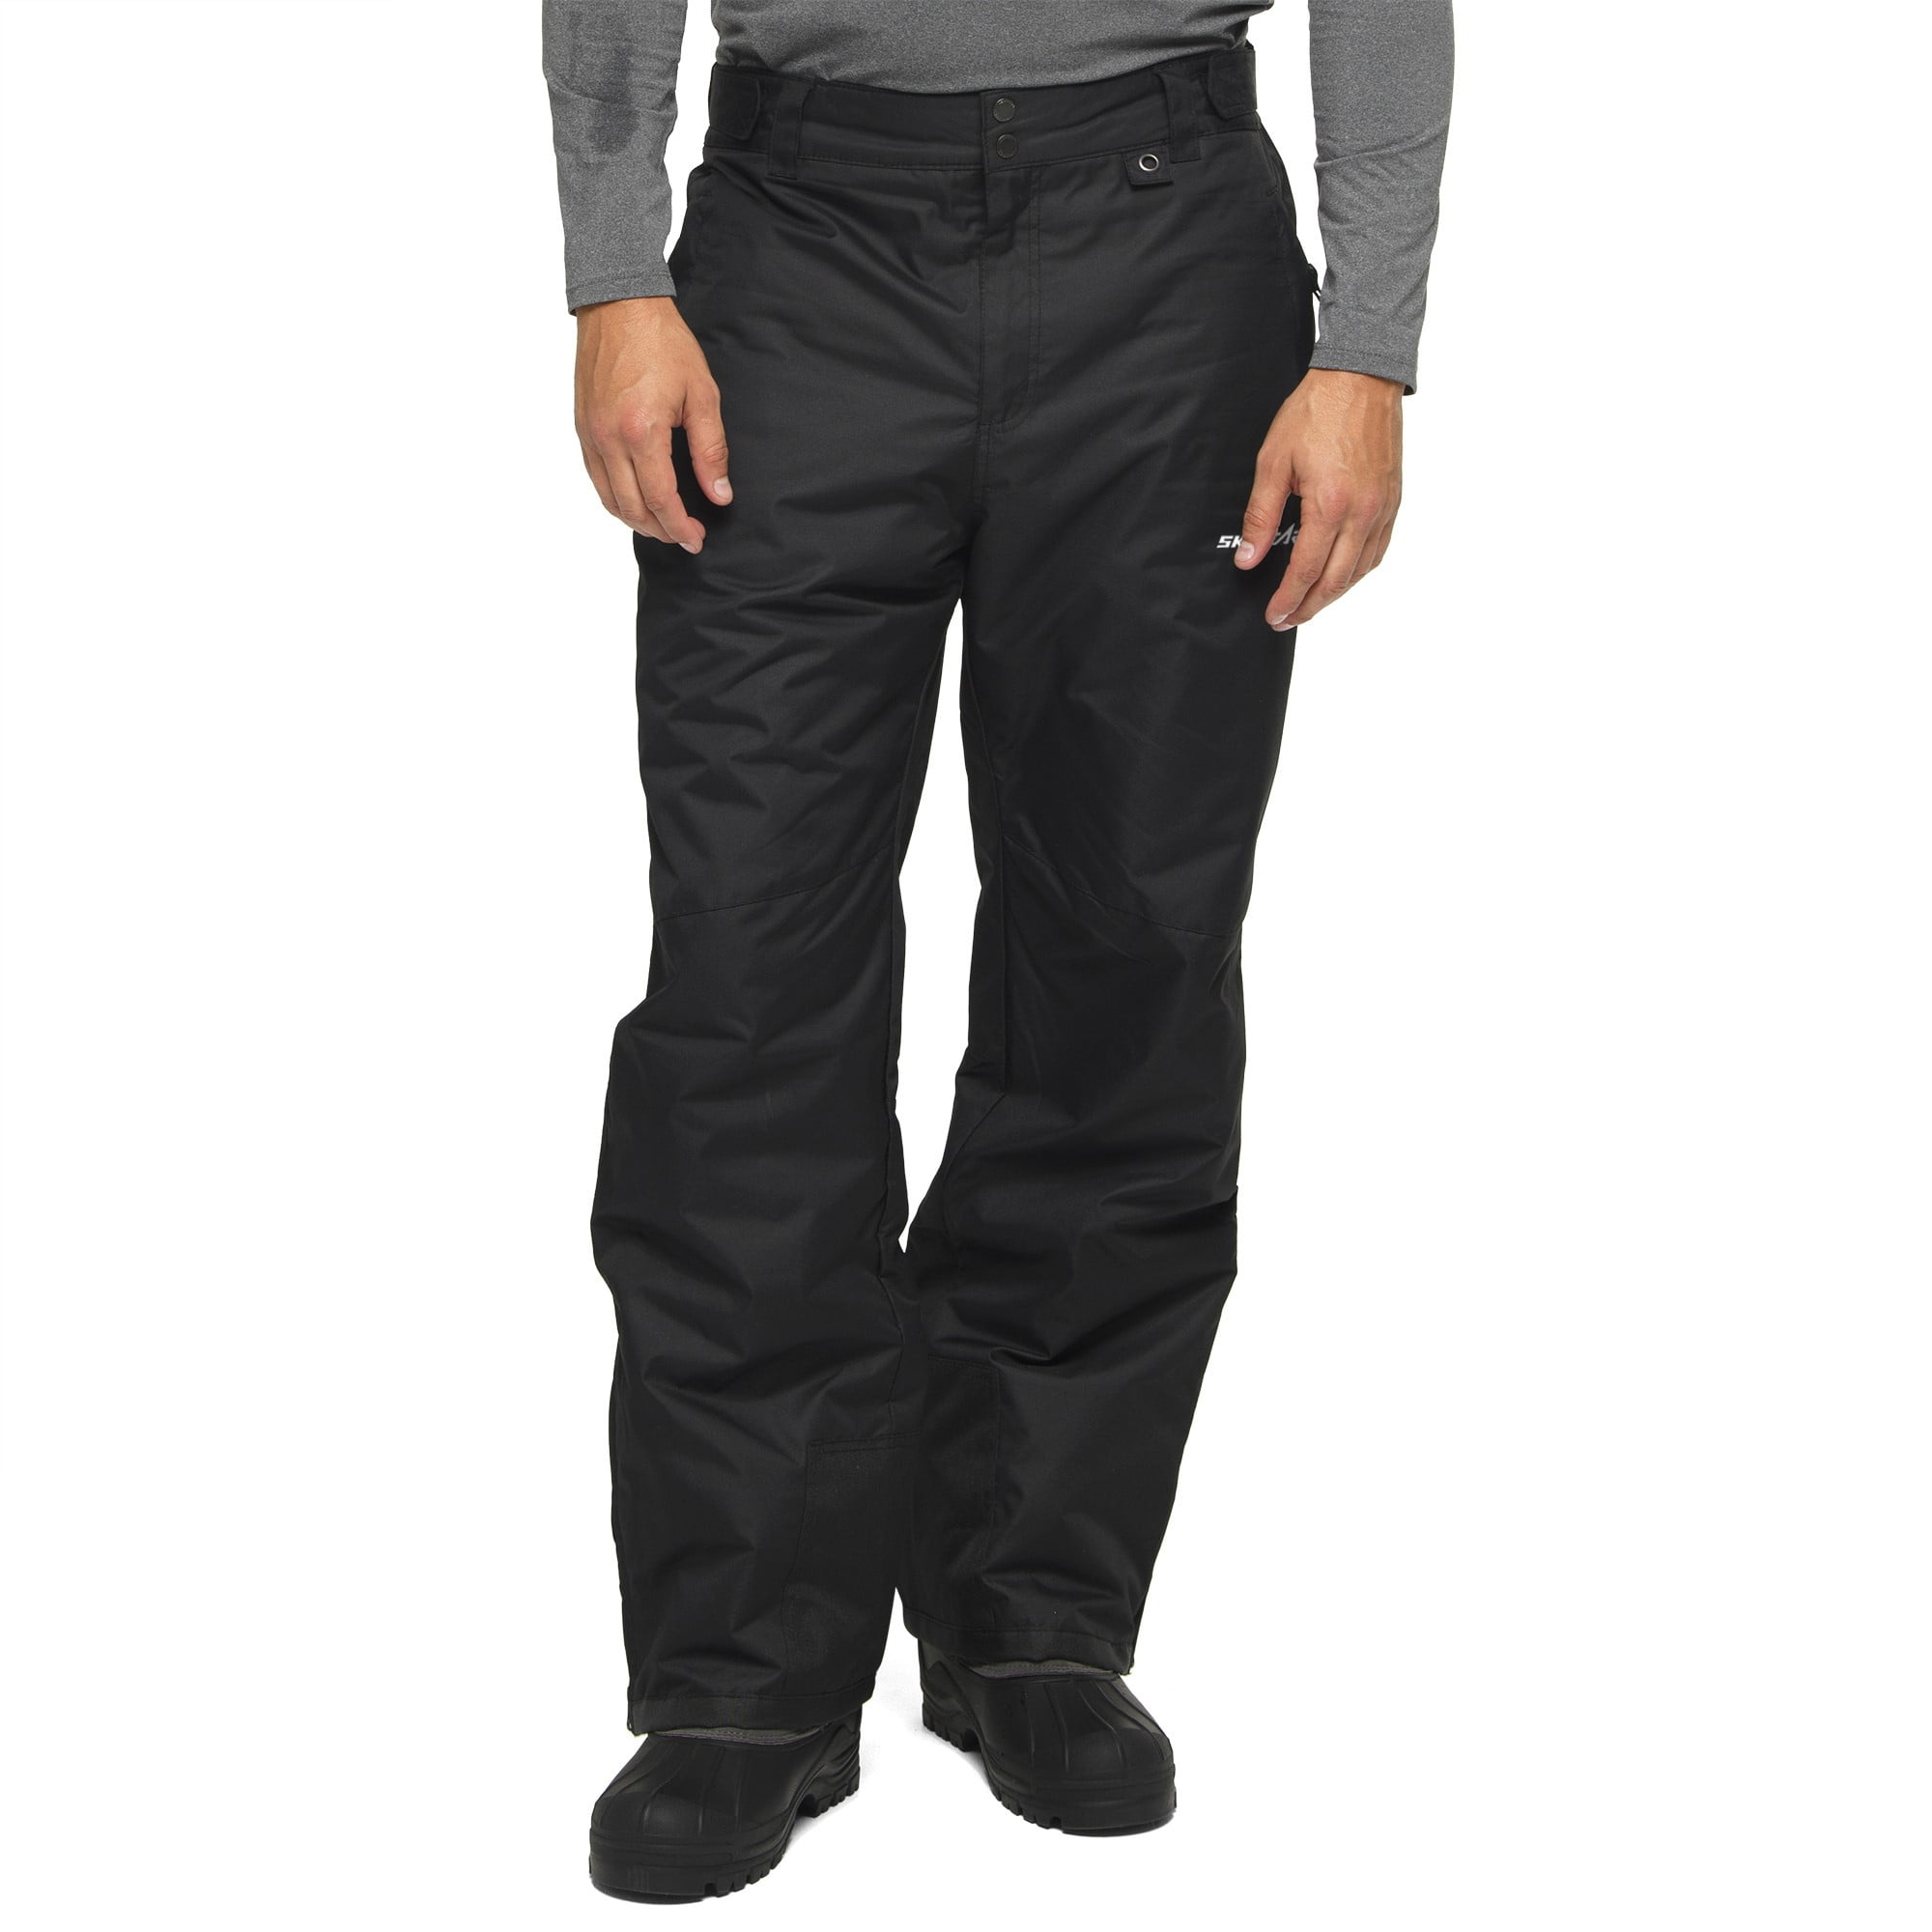 ARCTIX Women's Insulated Snow Pant # 2x for sale online 